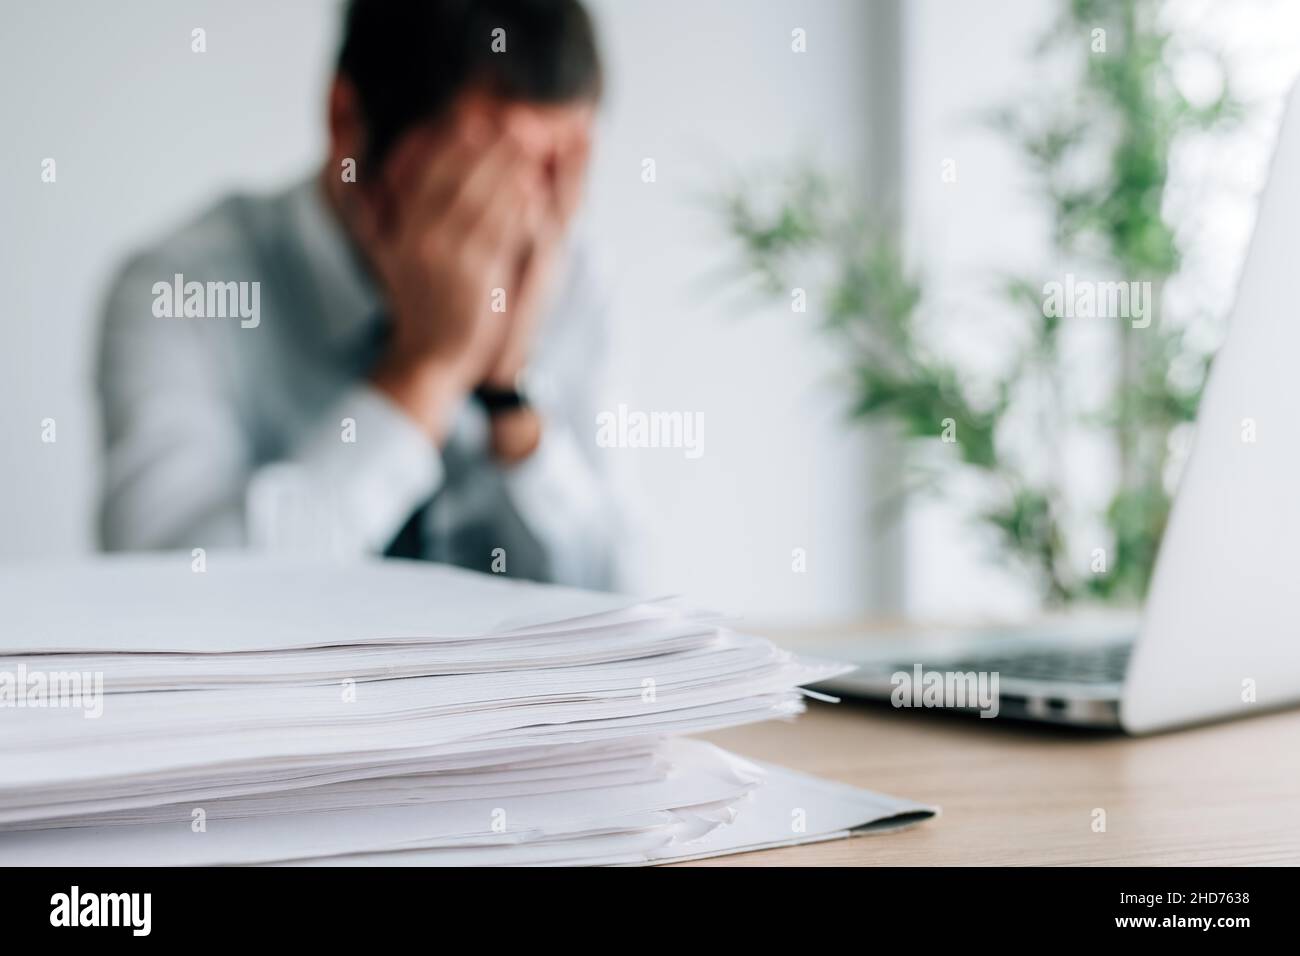 Businessman crying in the office, man covering face with hands and bursting in tears, selective focus Stock Photo